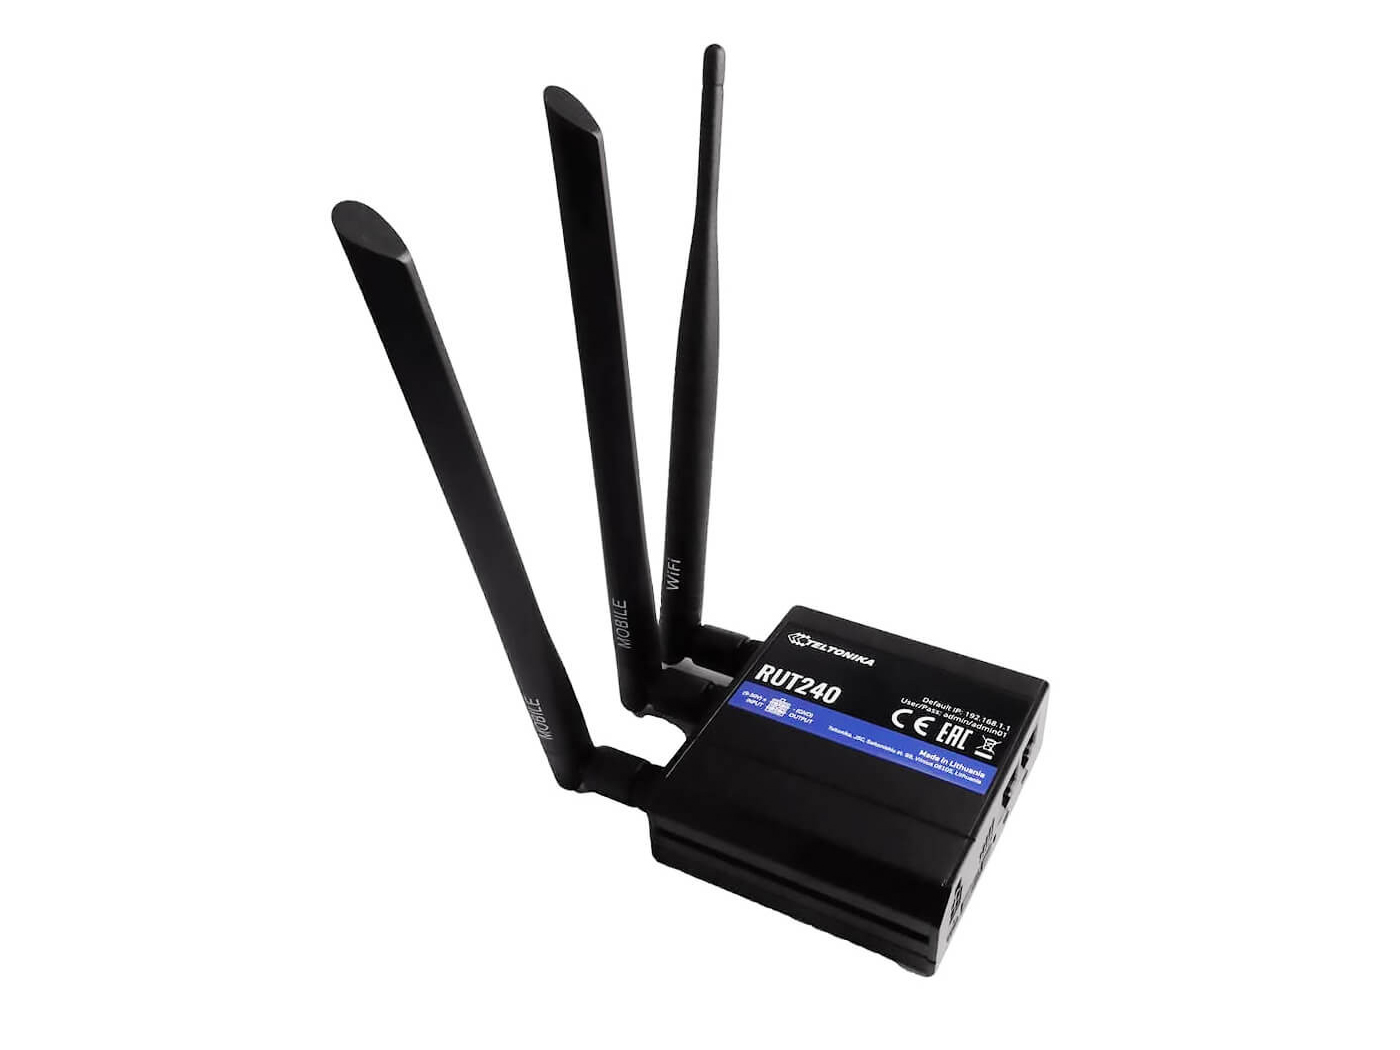 ICRealtime M2M-RUT240 Compact 4G /LTE and WiFi Cellular Router